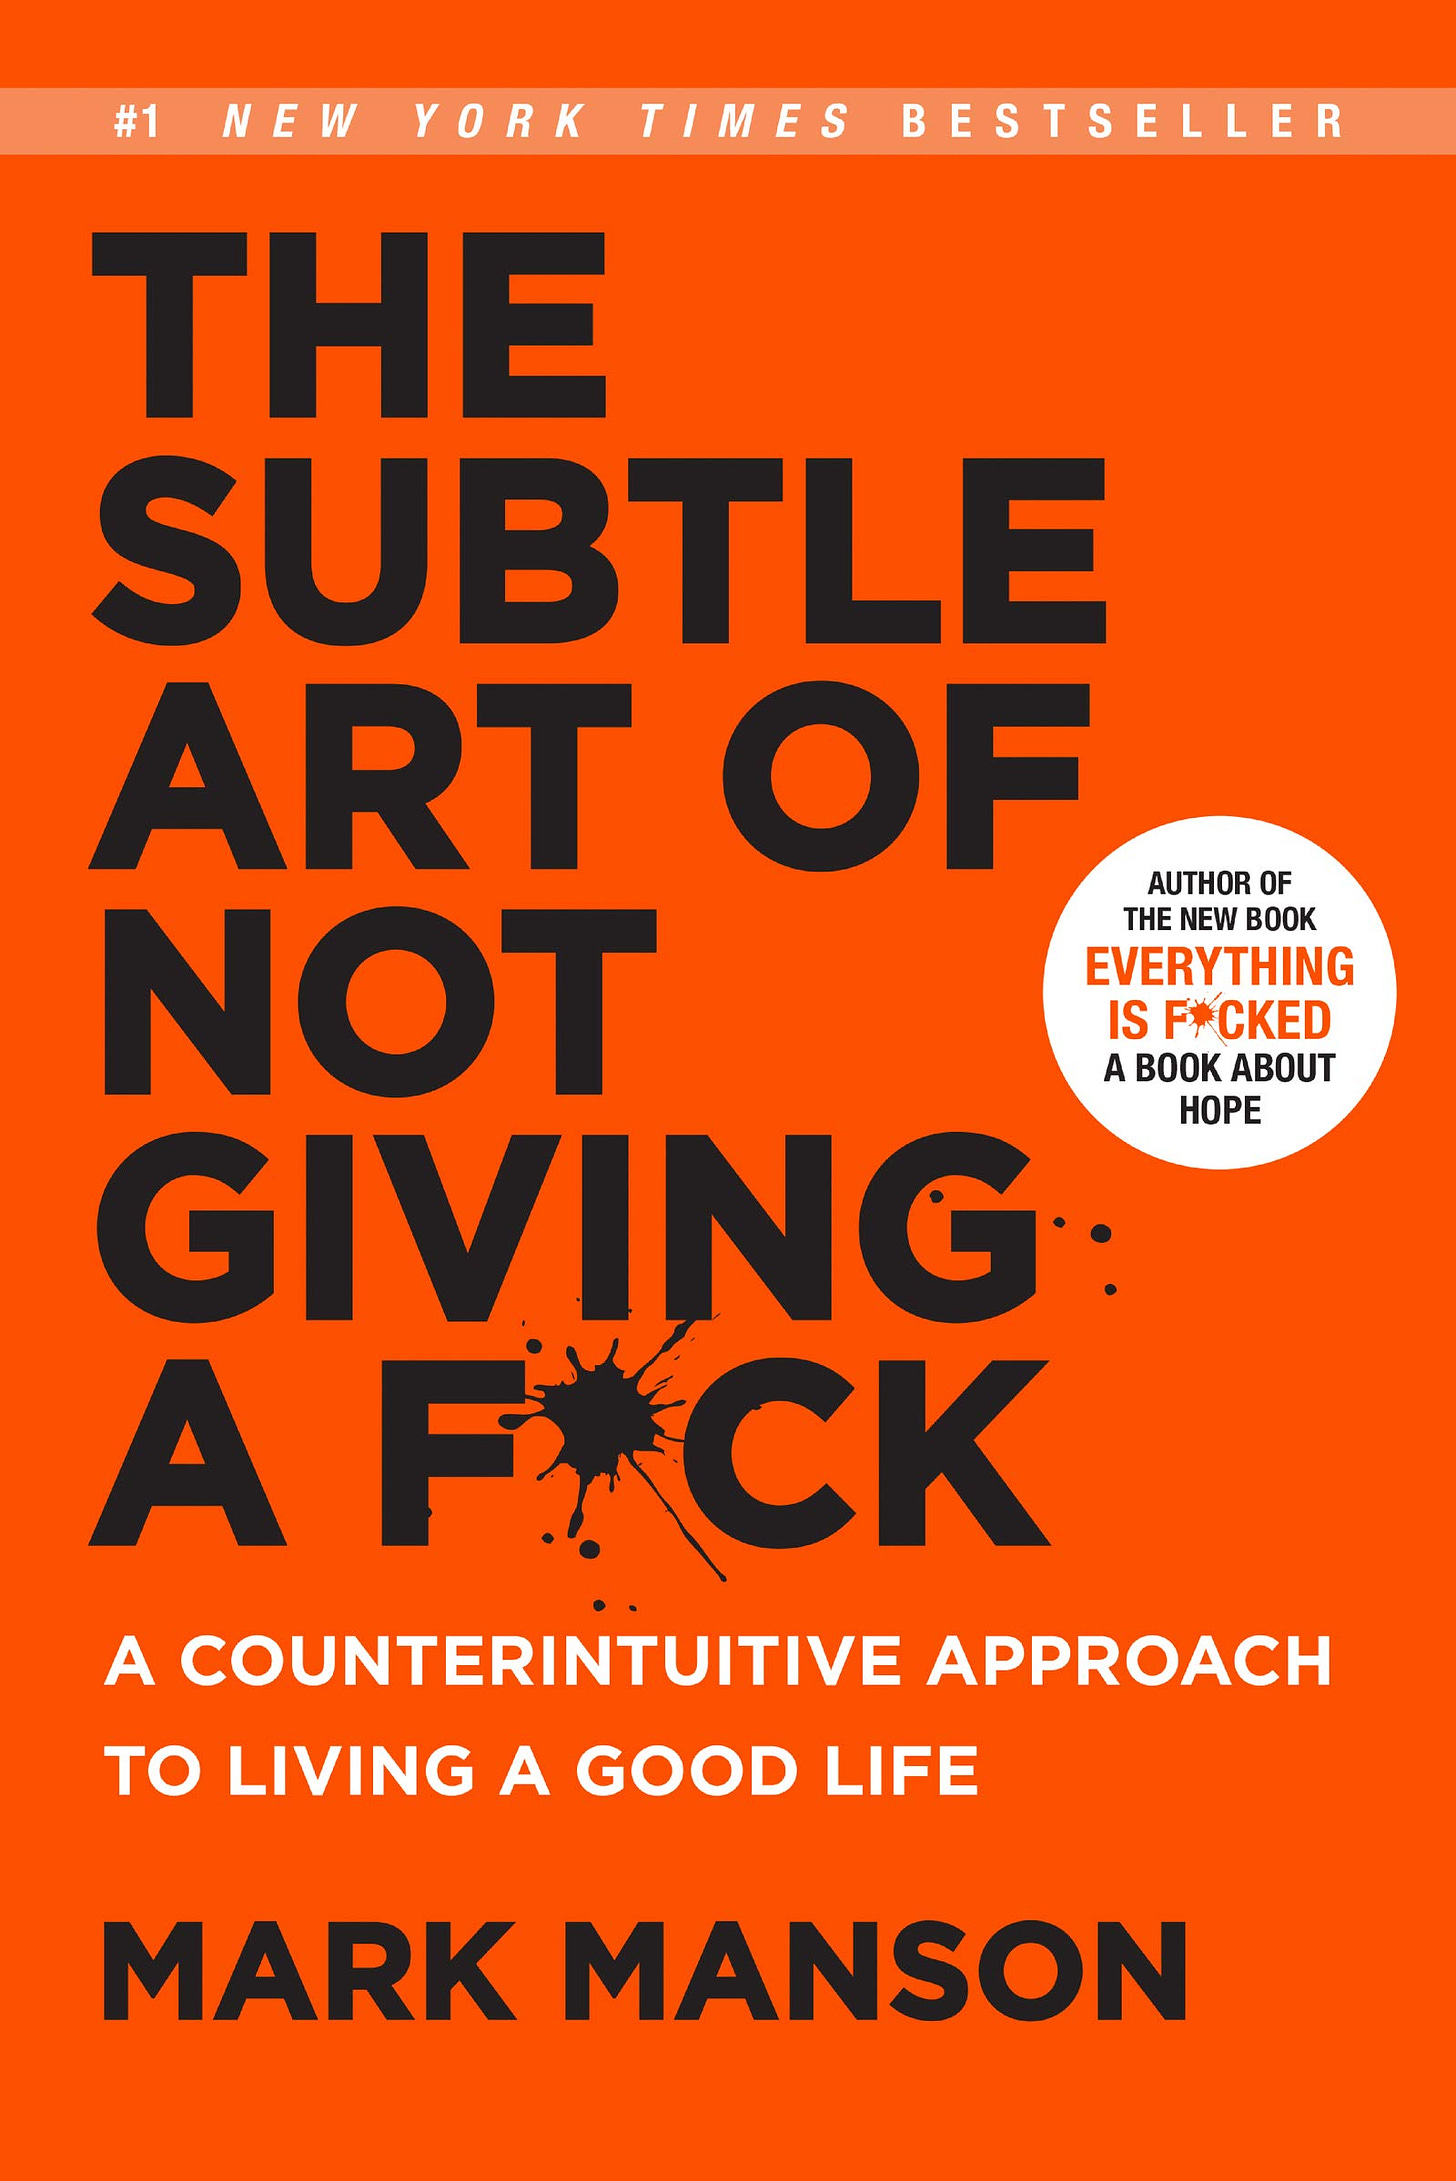 Amazon.com: The Subtle Art of Not Giving a F*ck: A Counterintuitive  Approach to Living a Good Life (9780062457714): Manson, Mark: Books